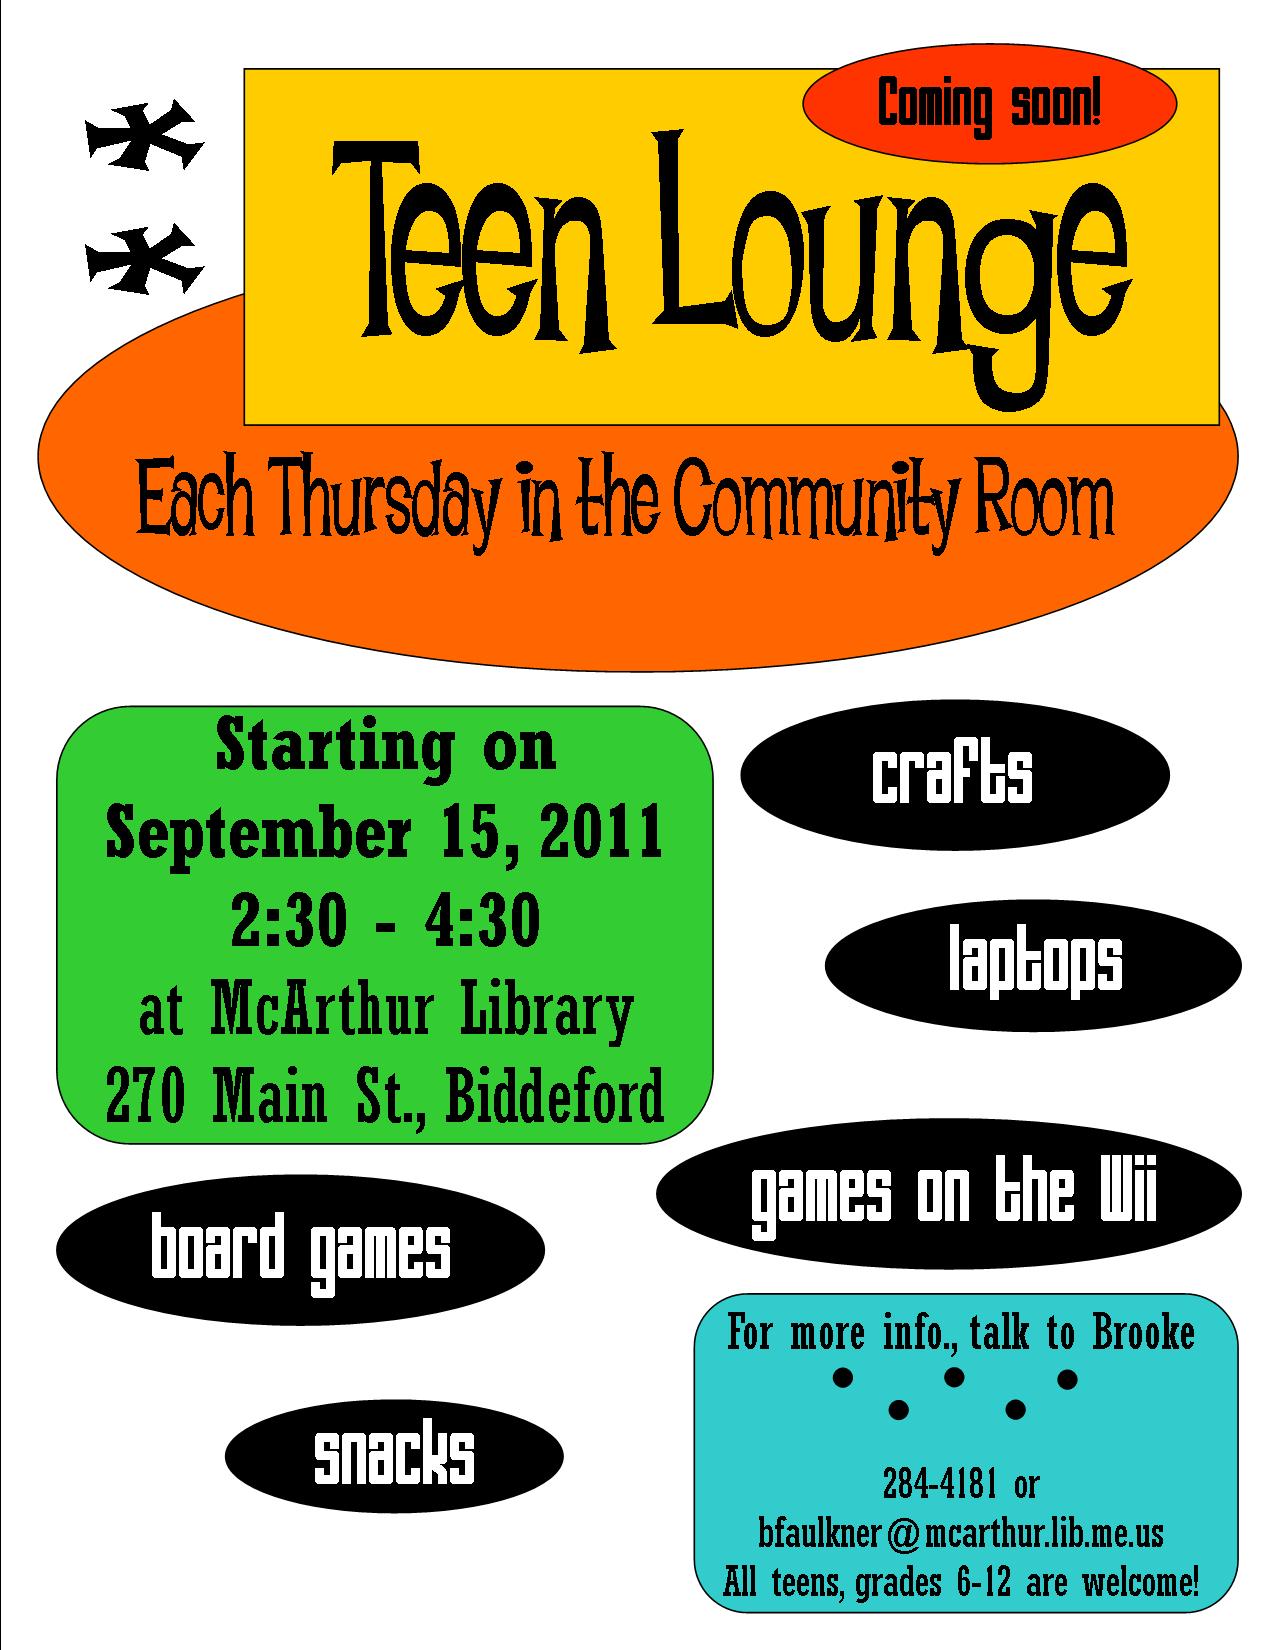 Library Lounge Teen Web Site 41